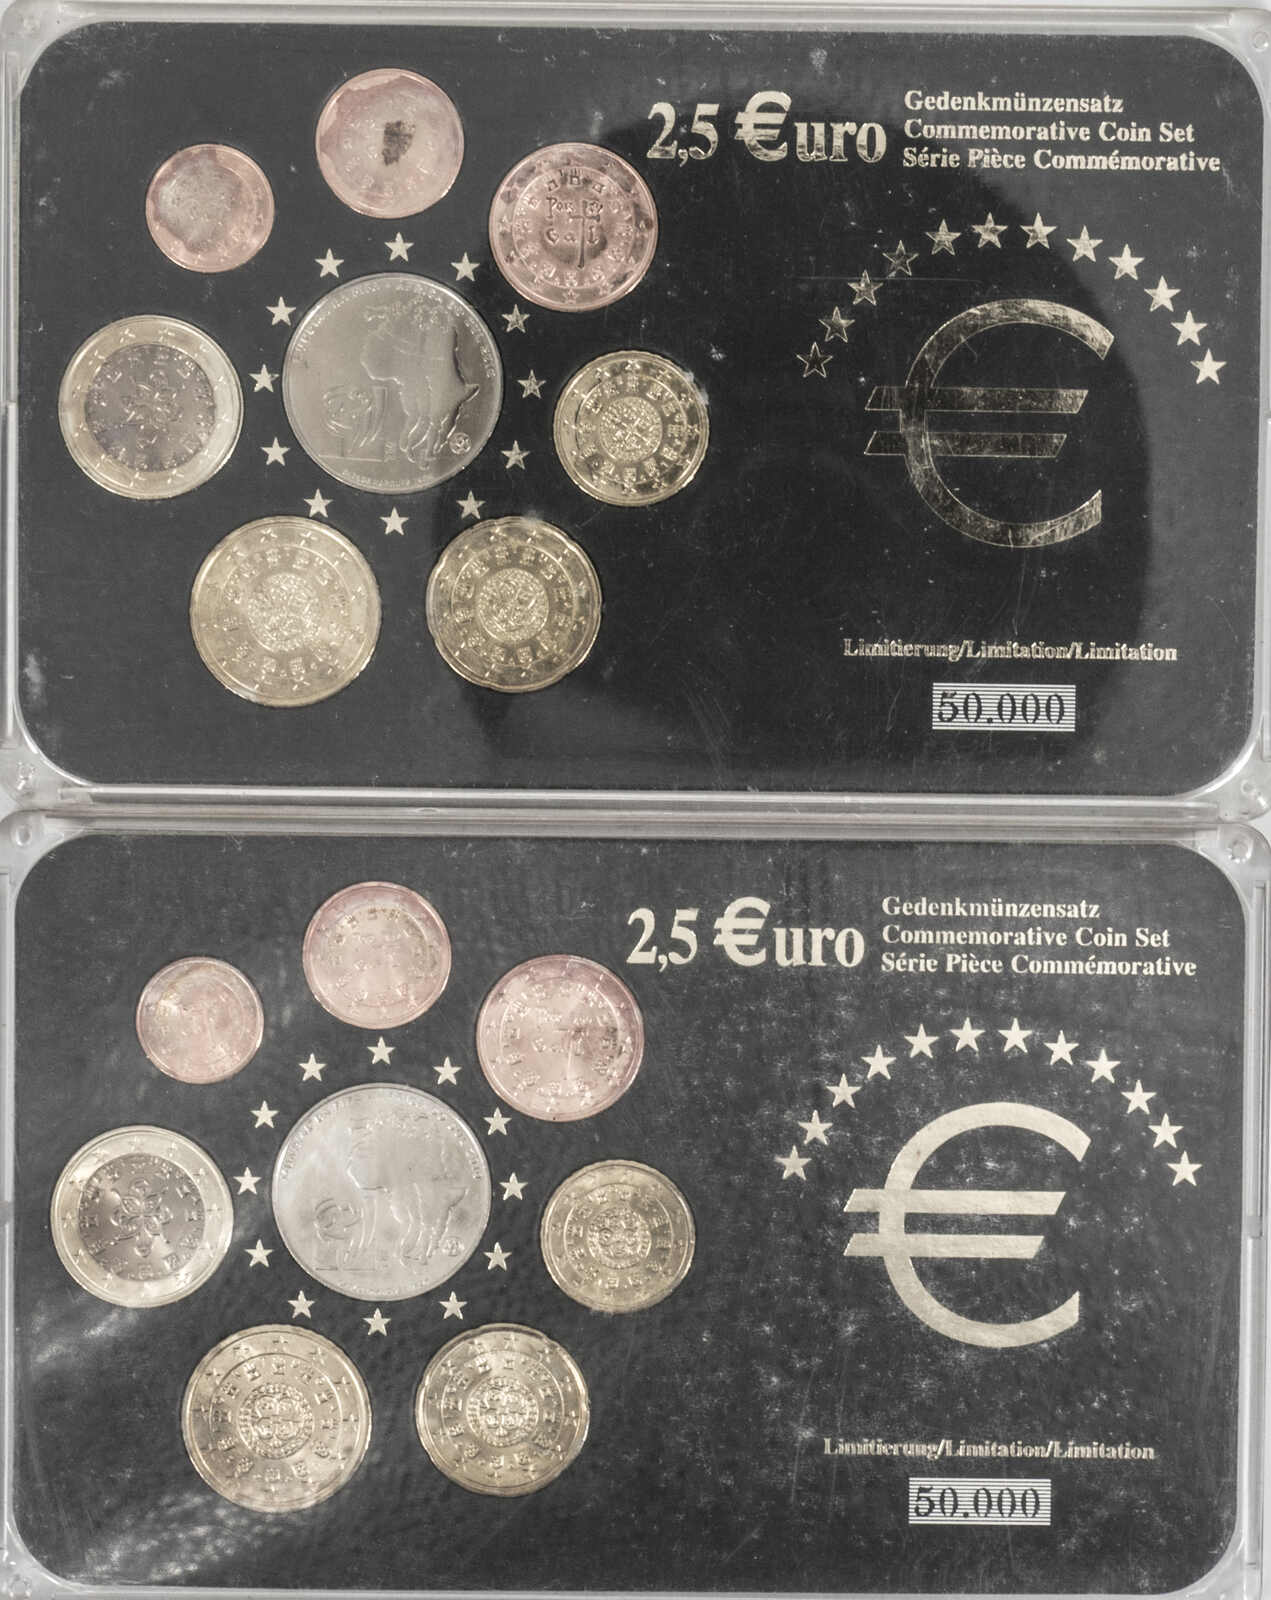 40.400.10.10: Europe - Portugal - Euro - Coins - sets